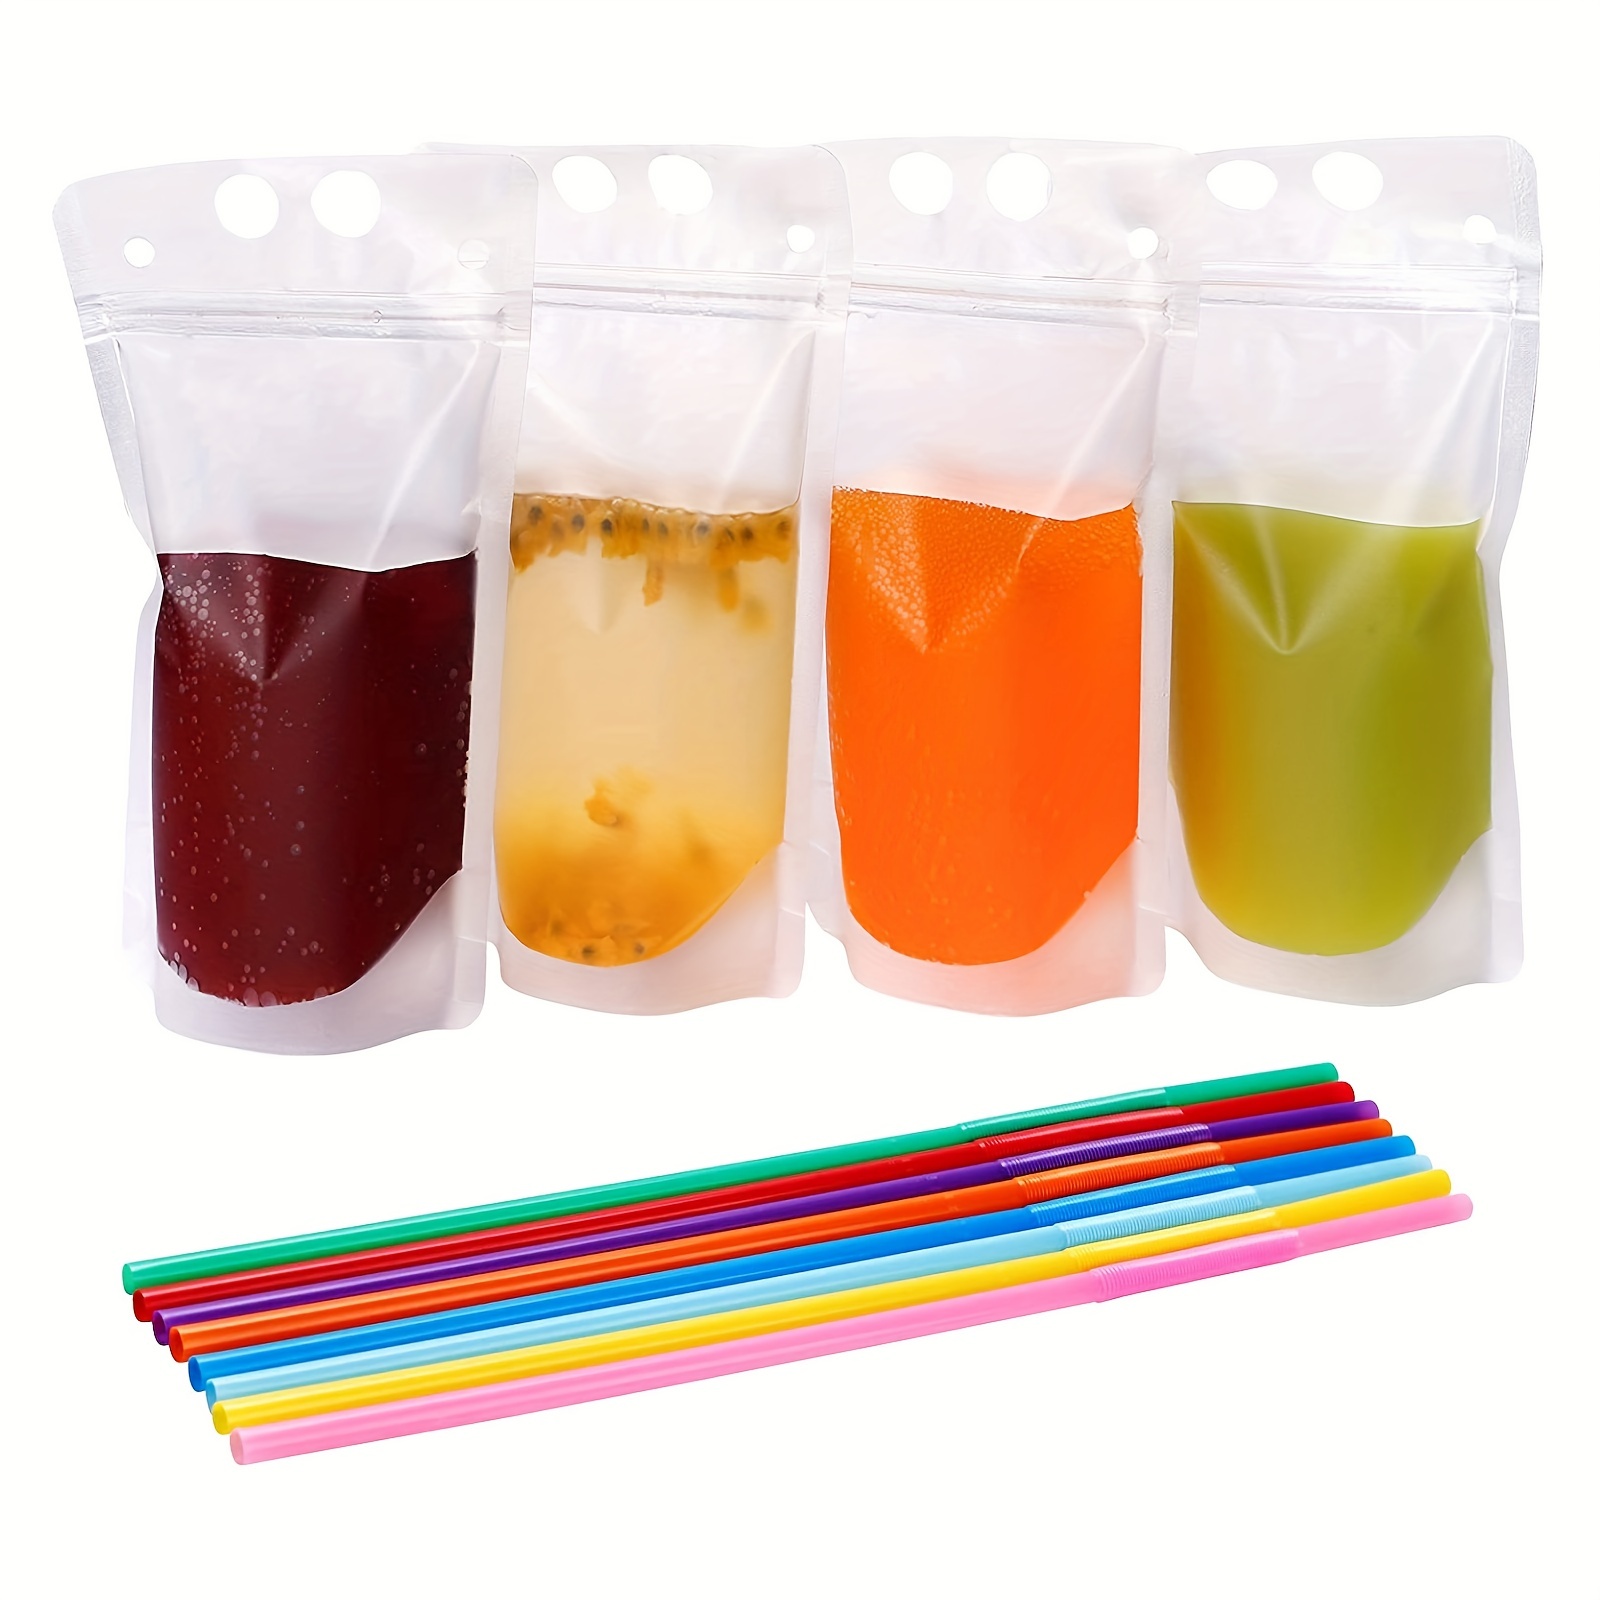 100 Pack Reusable Drink Pouches Stand Up Smoothie Juice Bags w